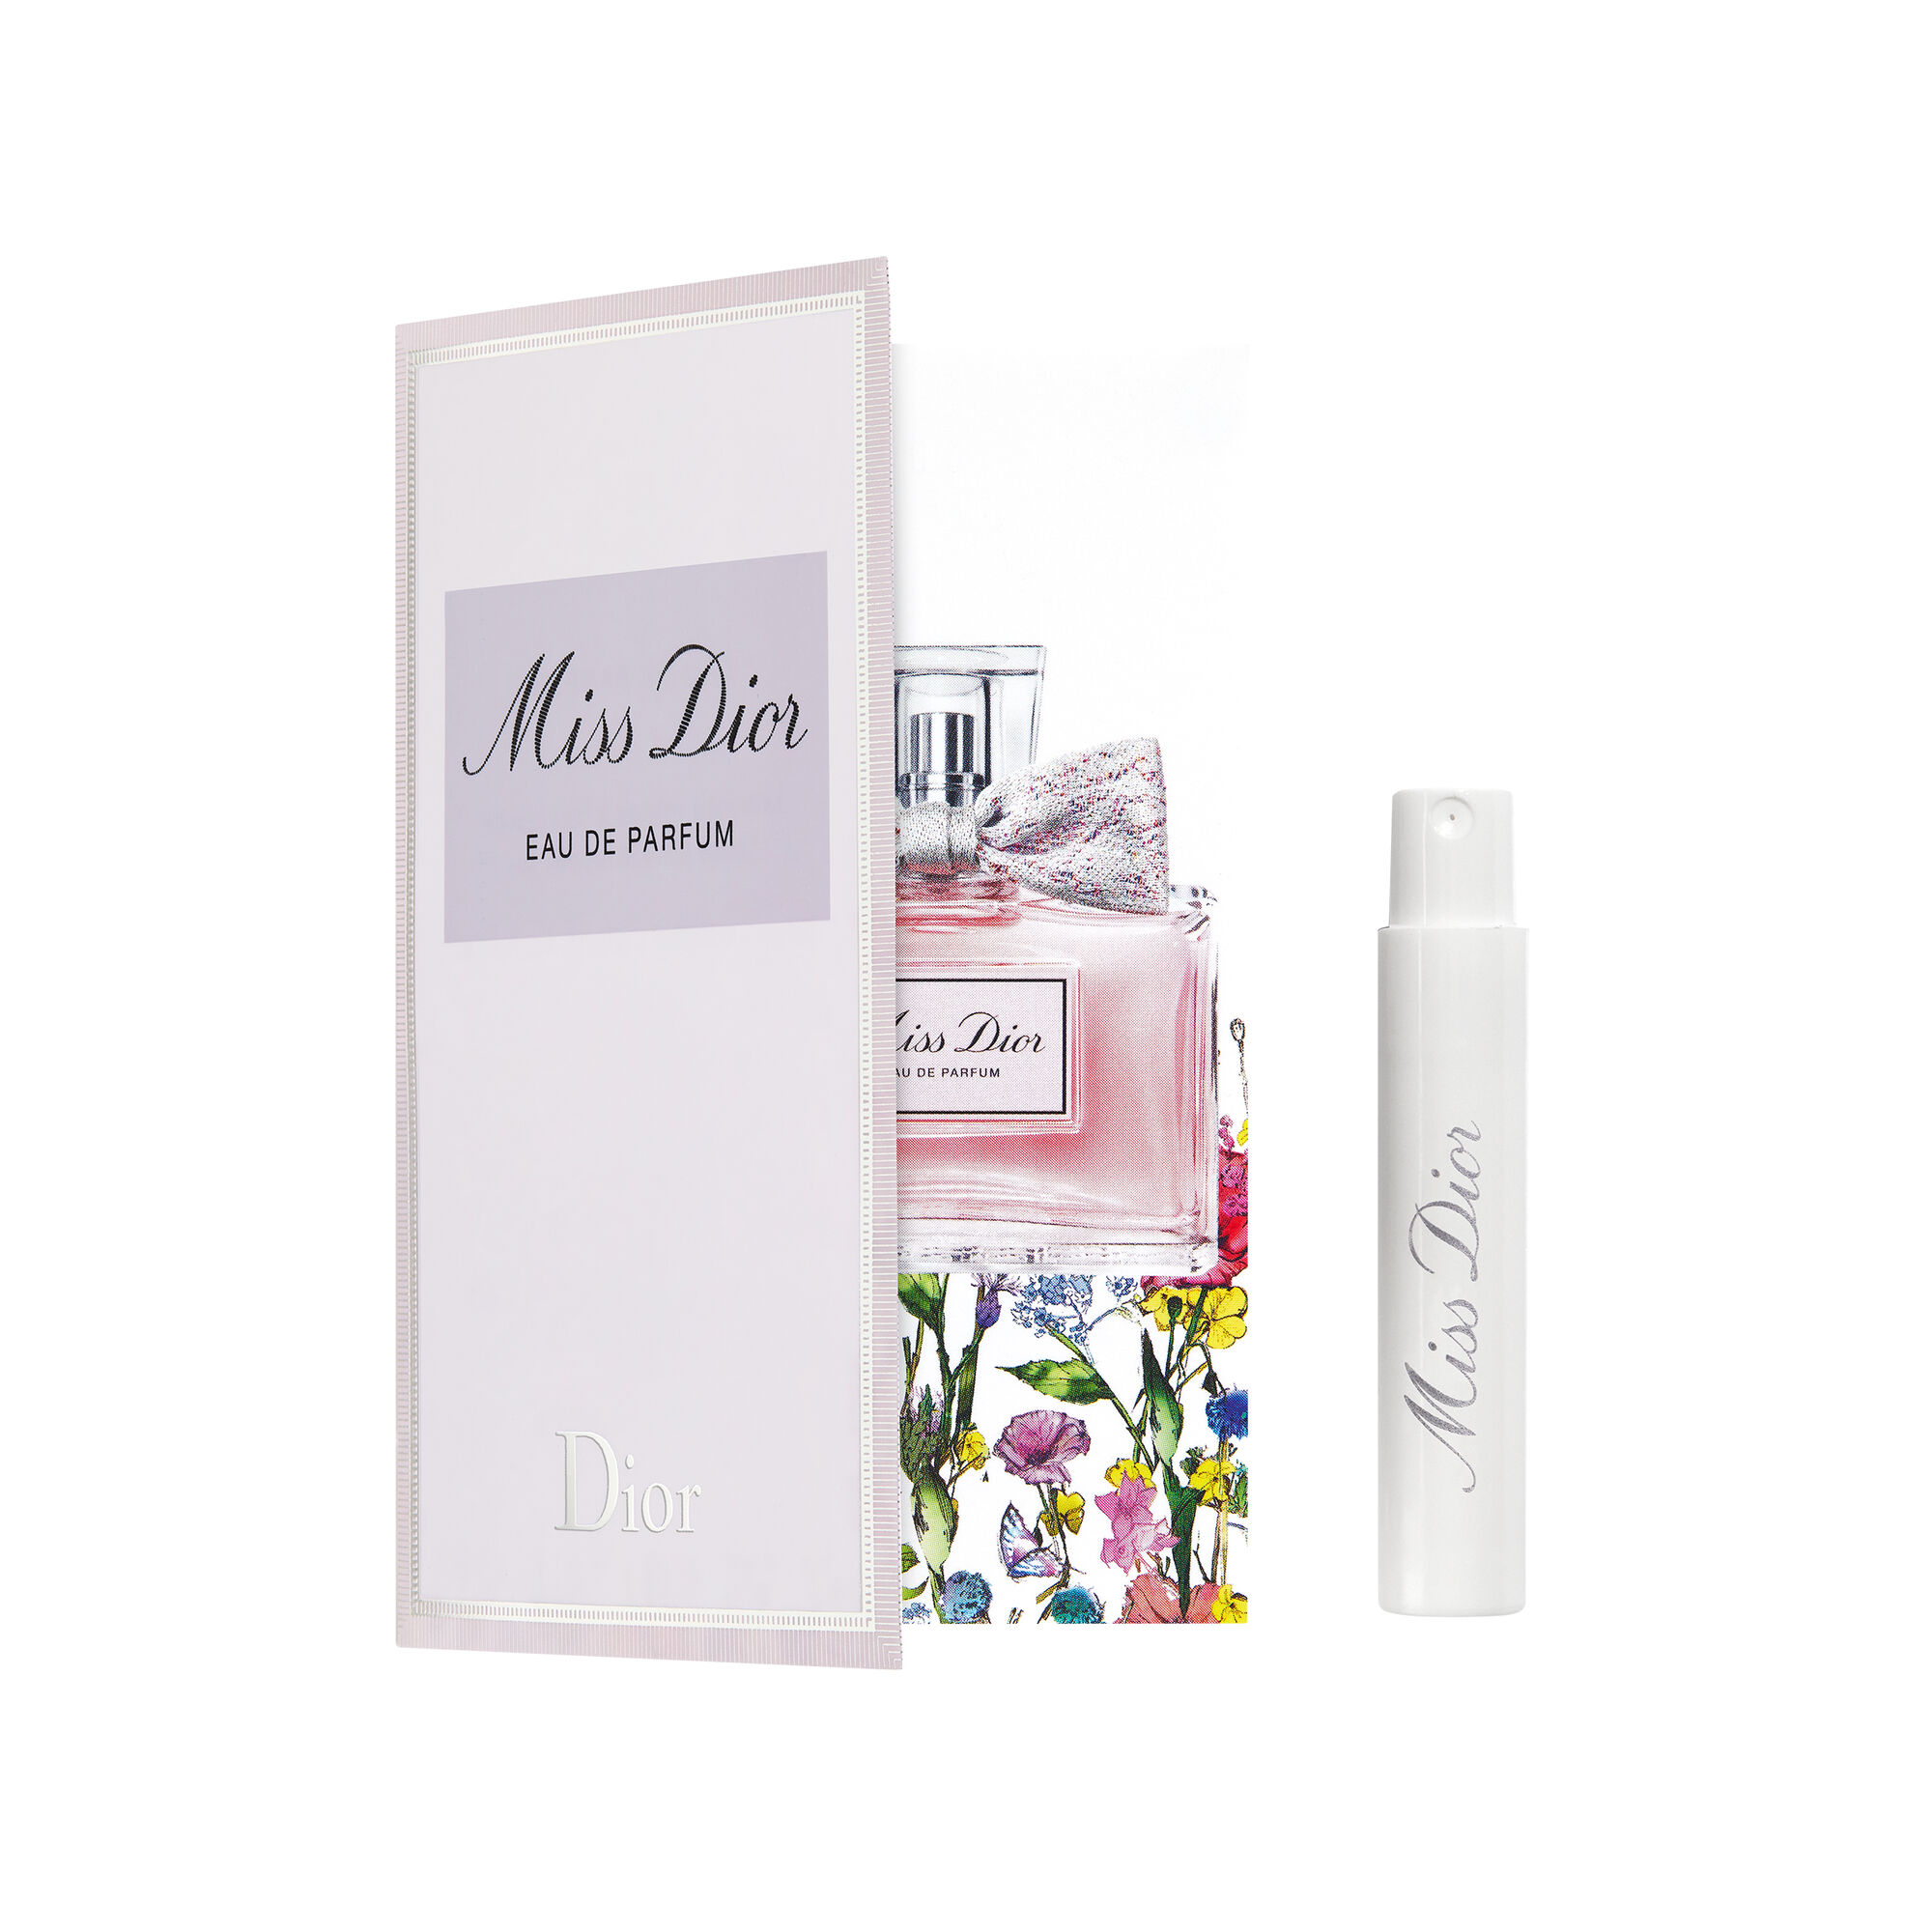 DIOR BUY & TRY SAMPLE GIFT